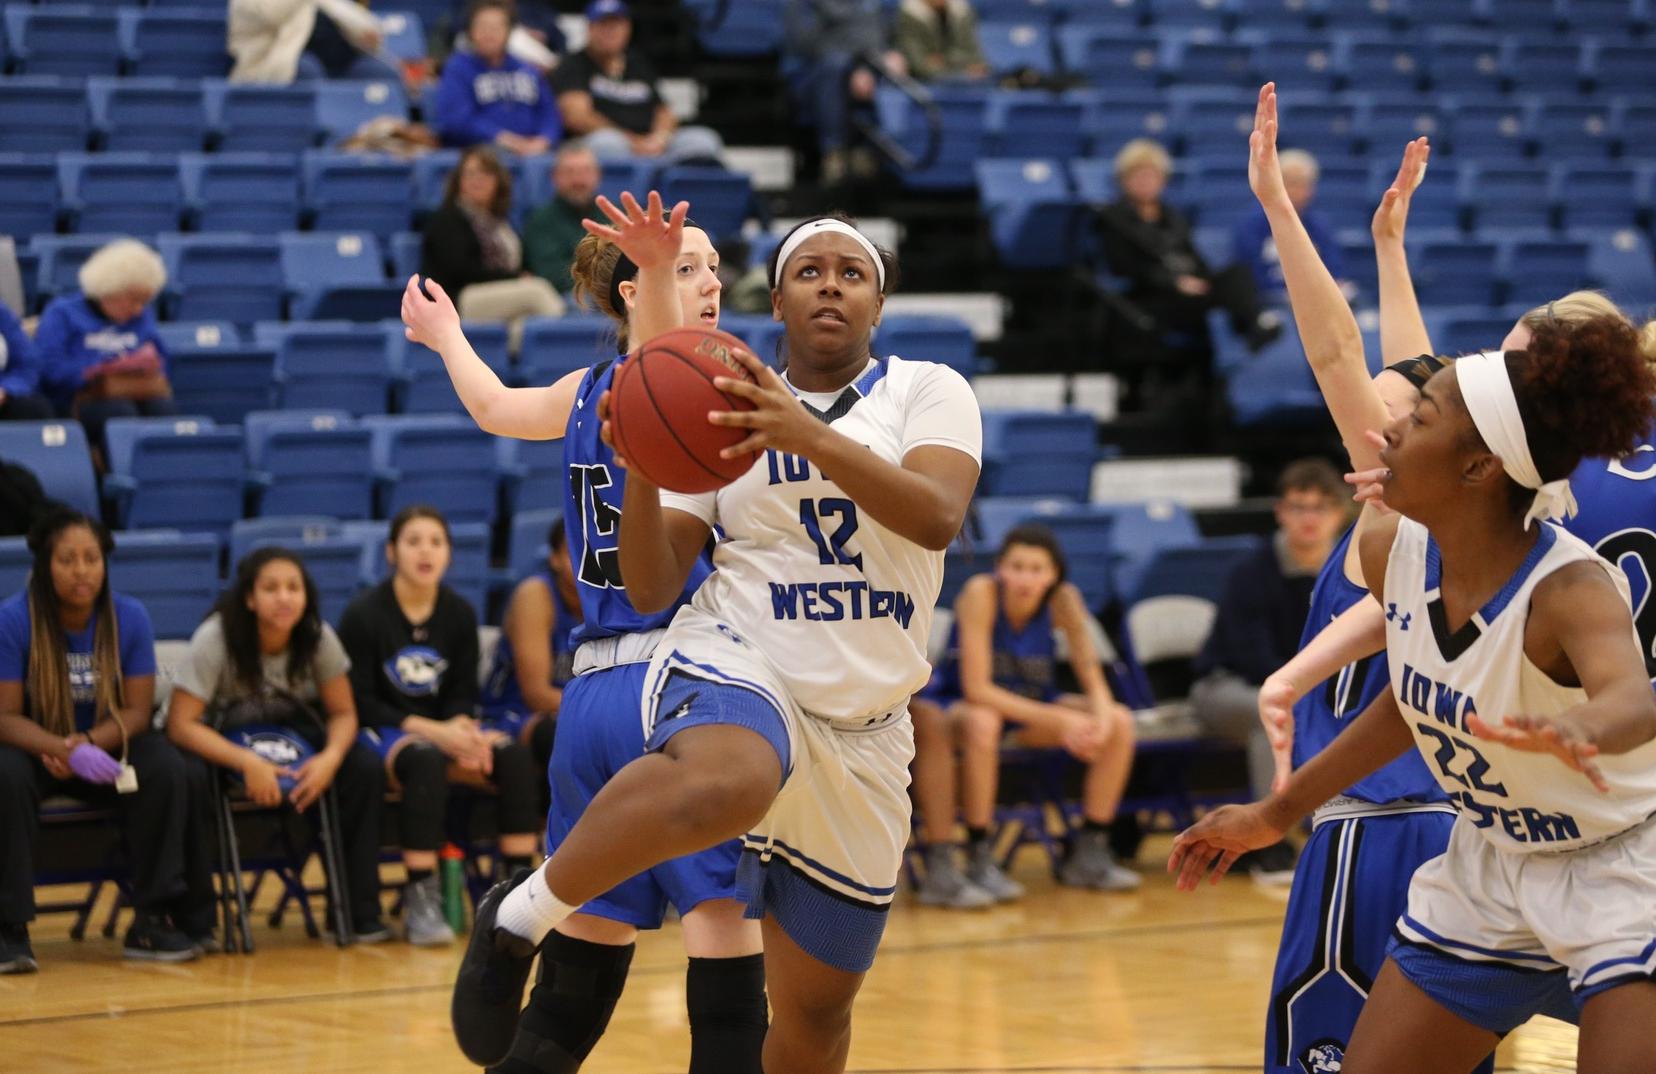 Azaria Floyd came up in the win over Marshalltown filling the stat sheet with 15 points, 4 rebounds and 3 assists.